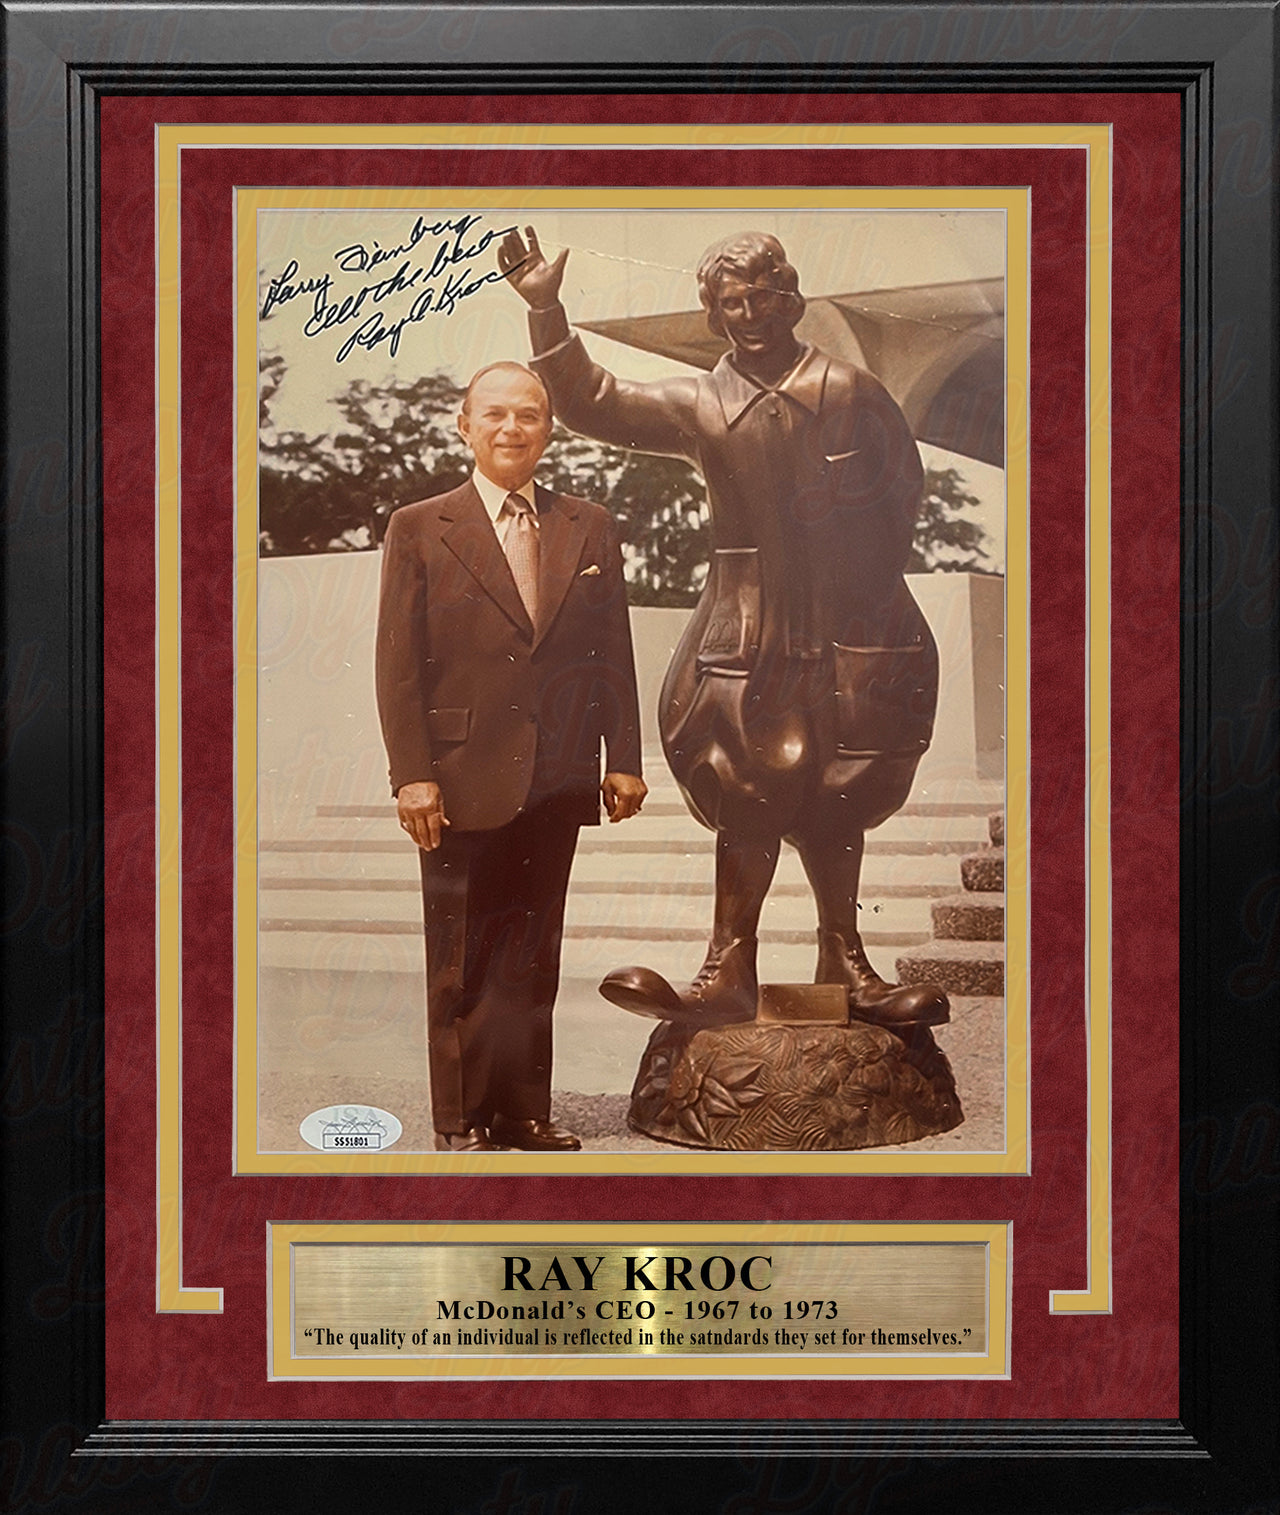 Ray Kroc McDonald's CEO Autographed 8" x 10" Framed Photo - Dynasty Sports & Framing 